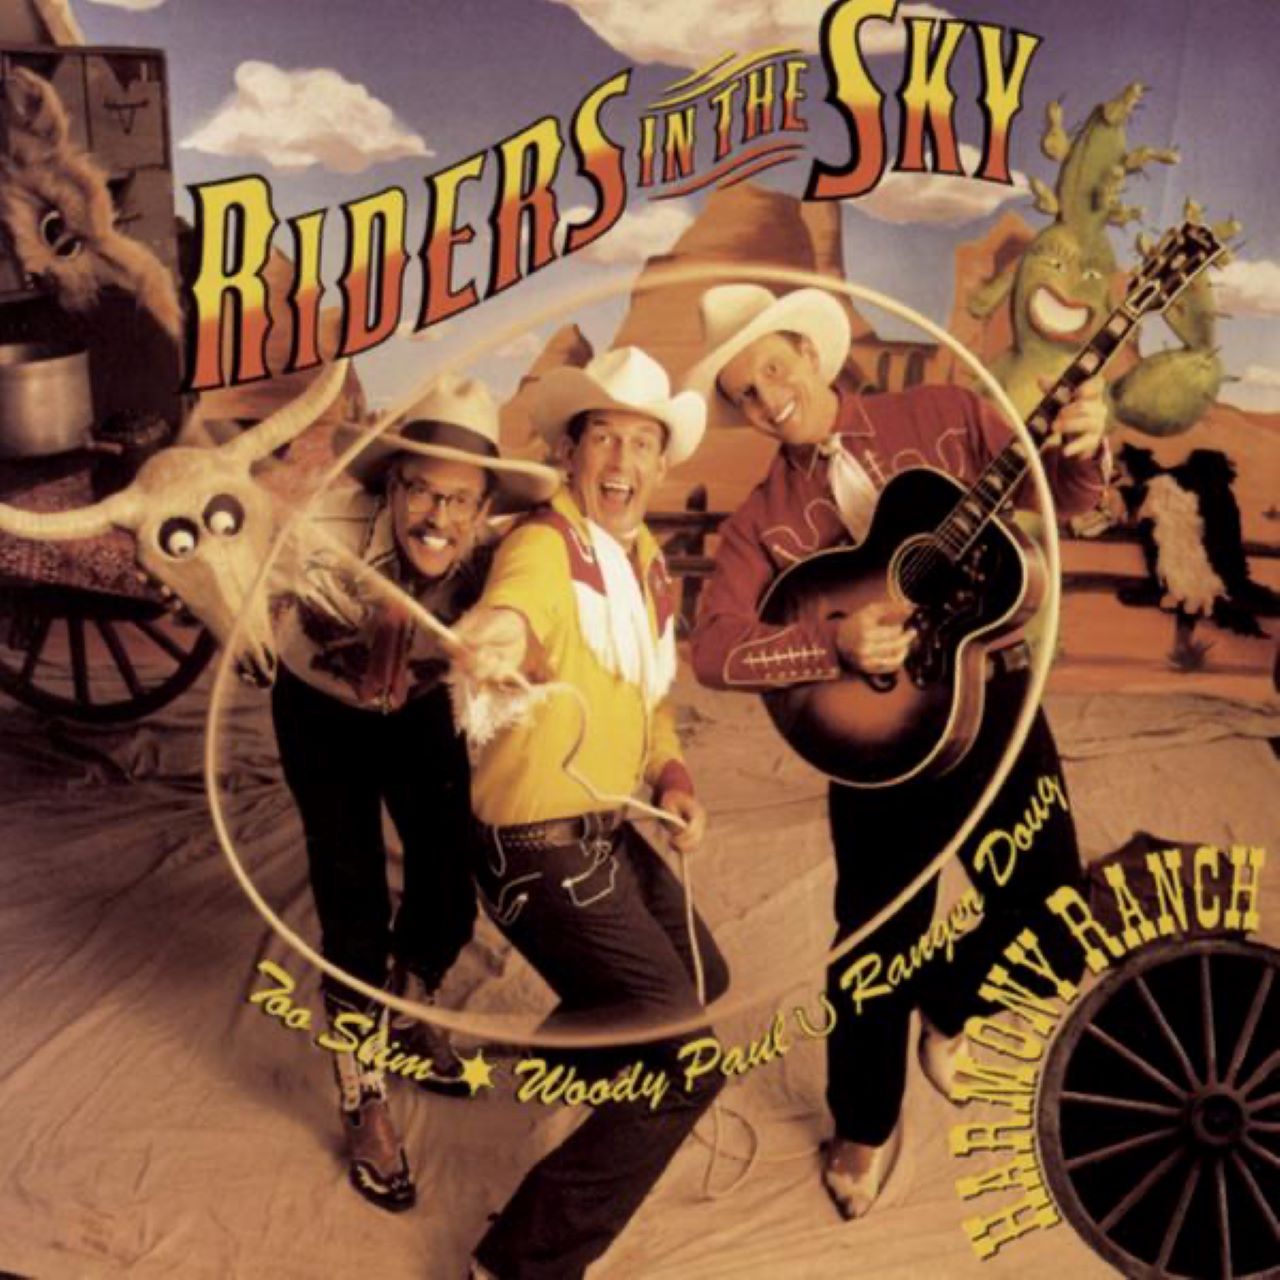 Riders In The Sky - Harmony Ranch cover album